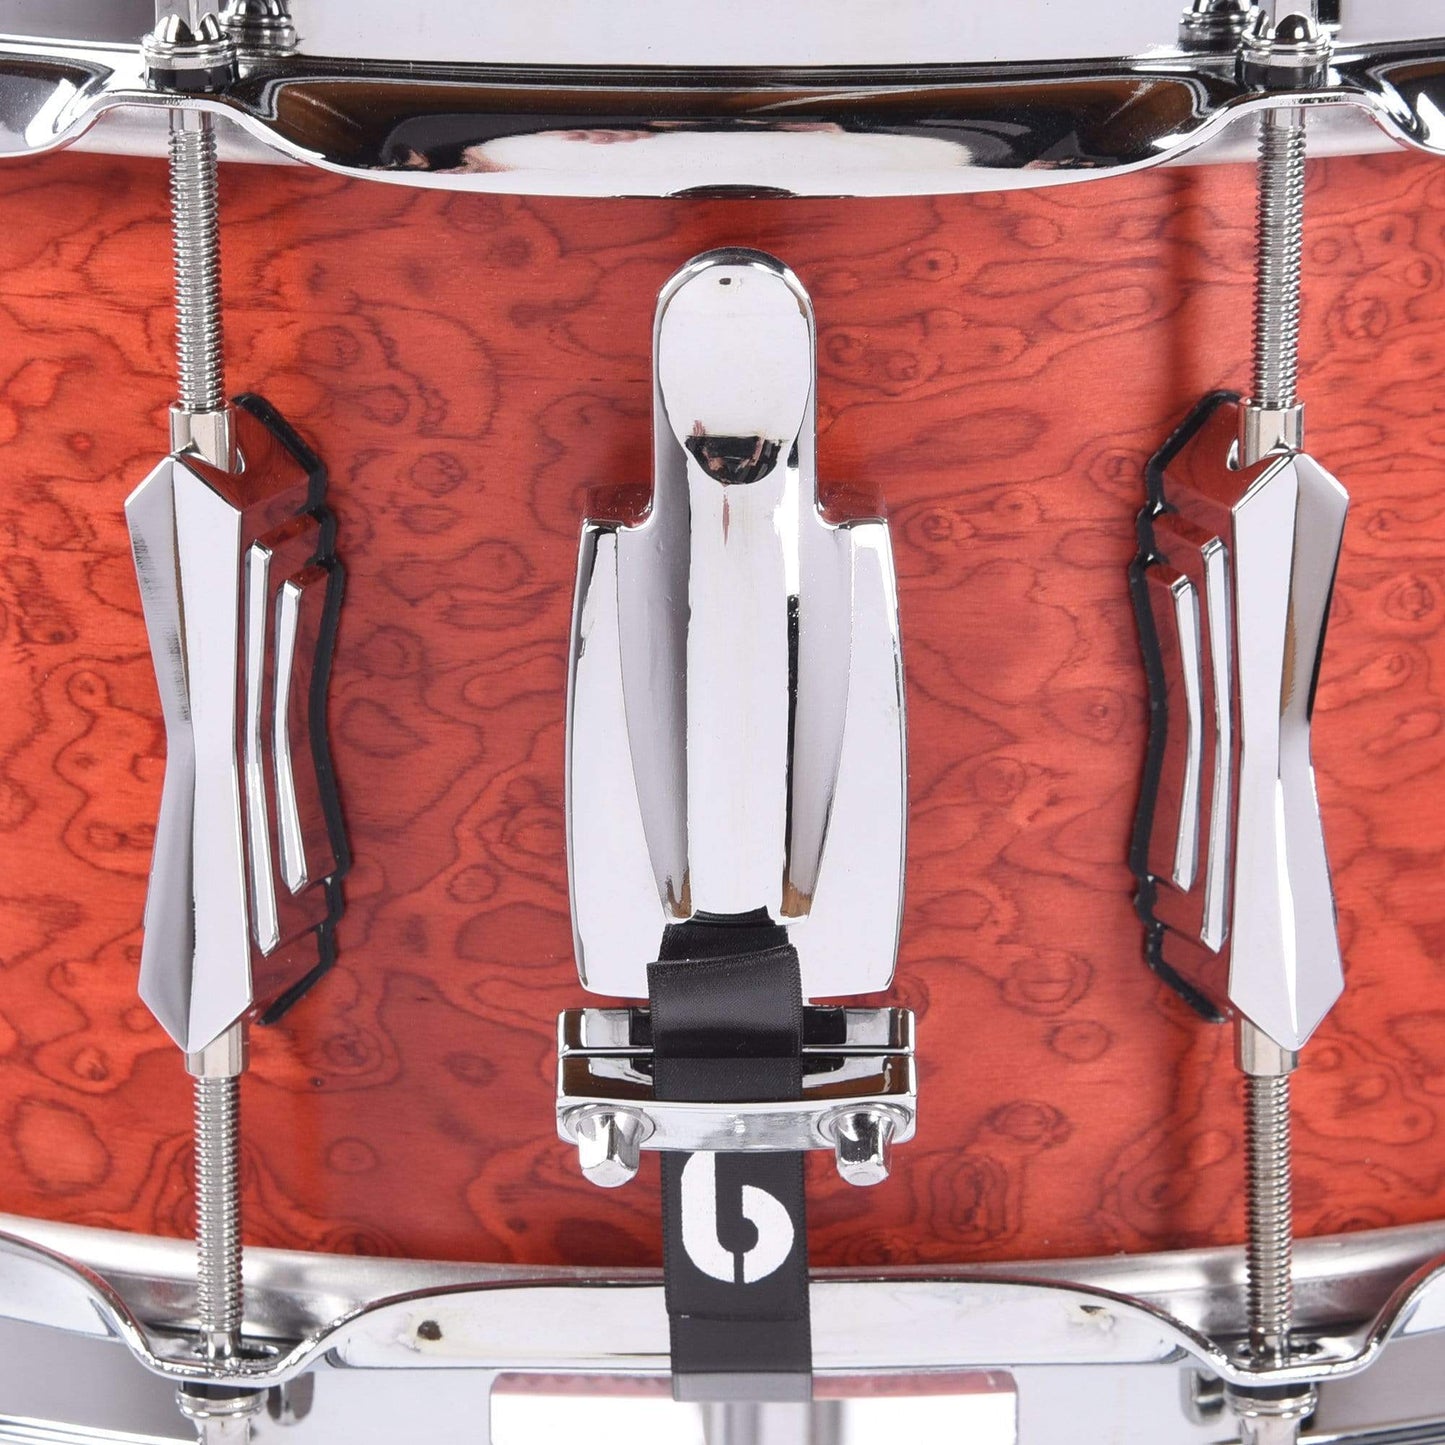 British Drum Co. 6.5x14 Legend Series Snare Drum Buckingham Scarlet Drums and Percussion / Acoustic Drums / Snare